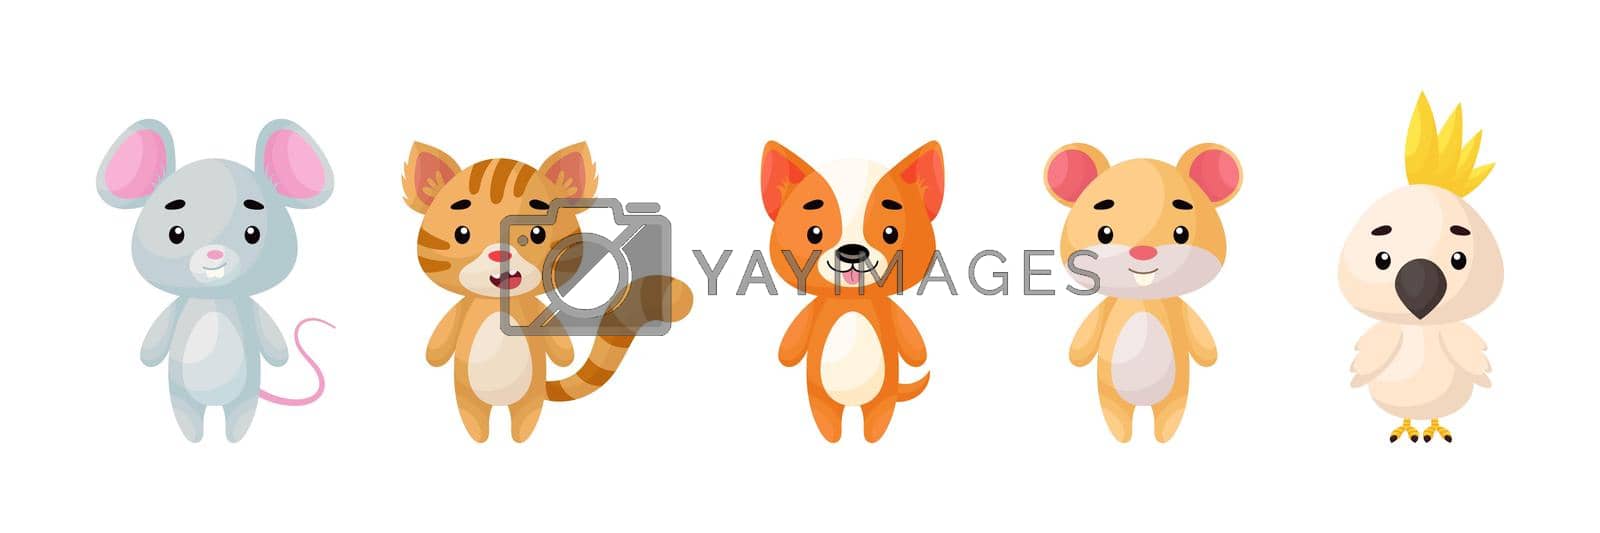 Cute pets animals set. Collection funny animals characters for kids cards, baby shower, birthday invitation, house interior. Bright colored childish vector illustration.